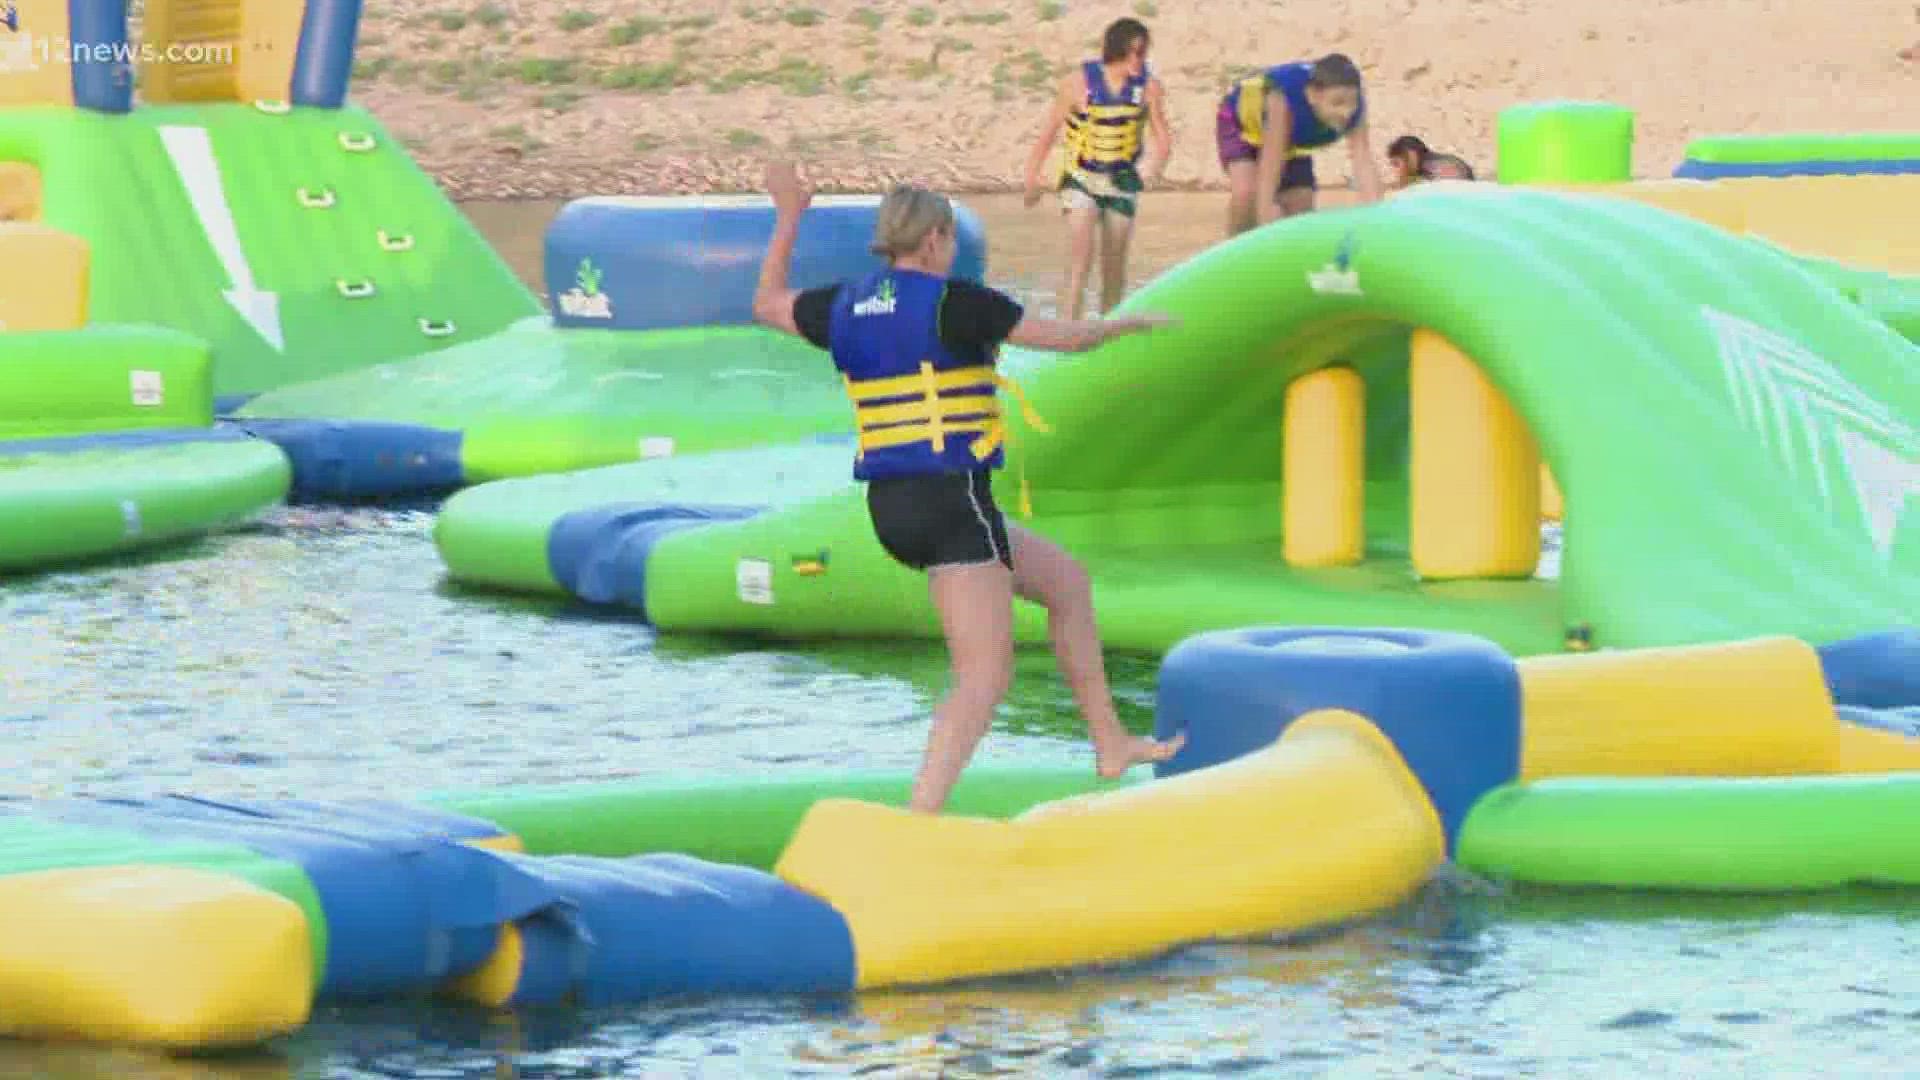 The inflatable, on-water course is open for the public to test their might. Head over to Scorpion Bay Marina at the Lake Pleasant Regional Park to try it!